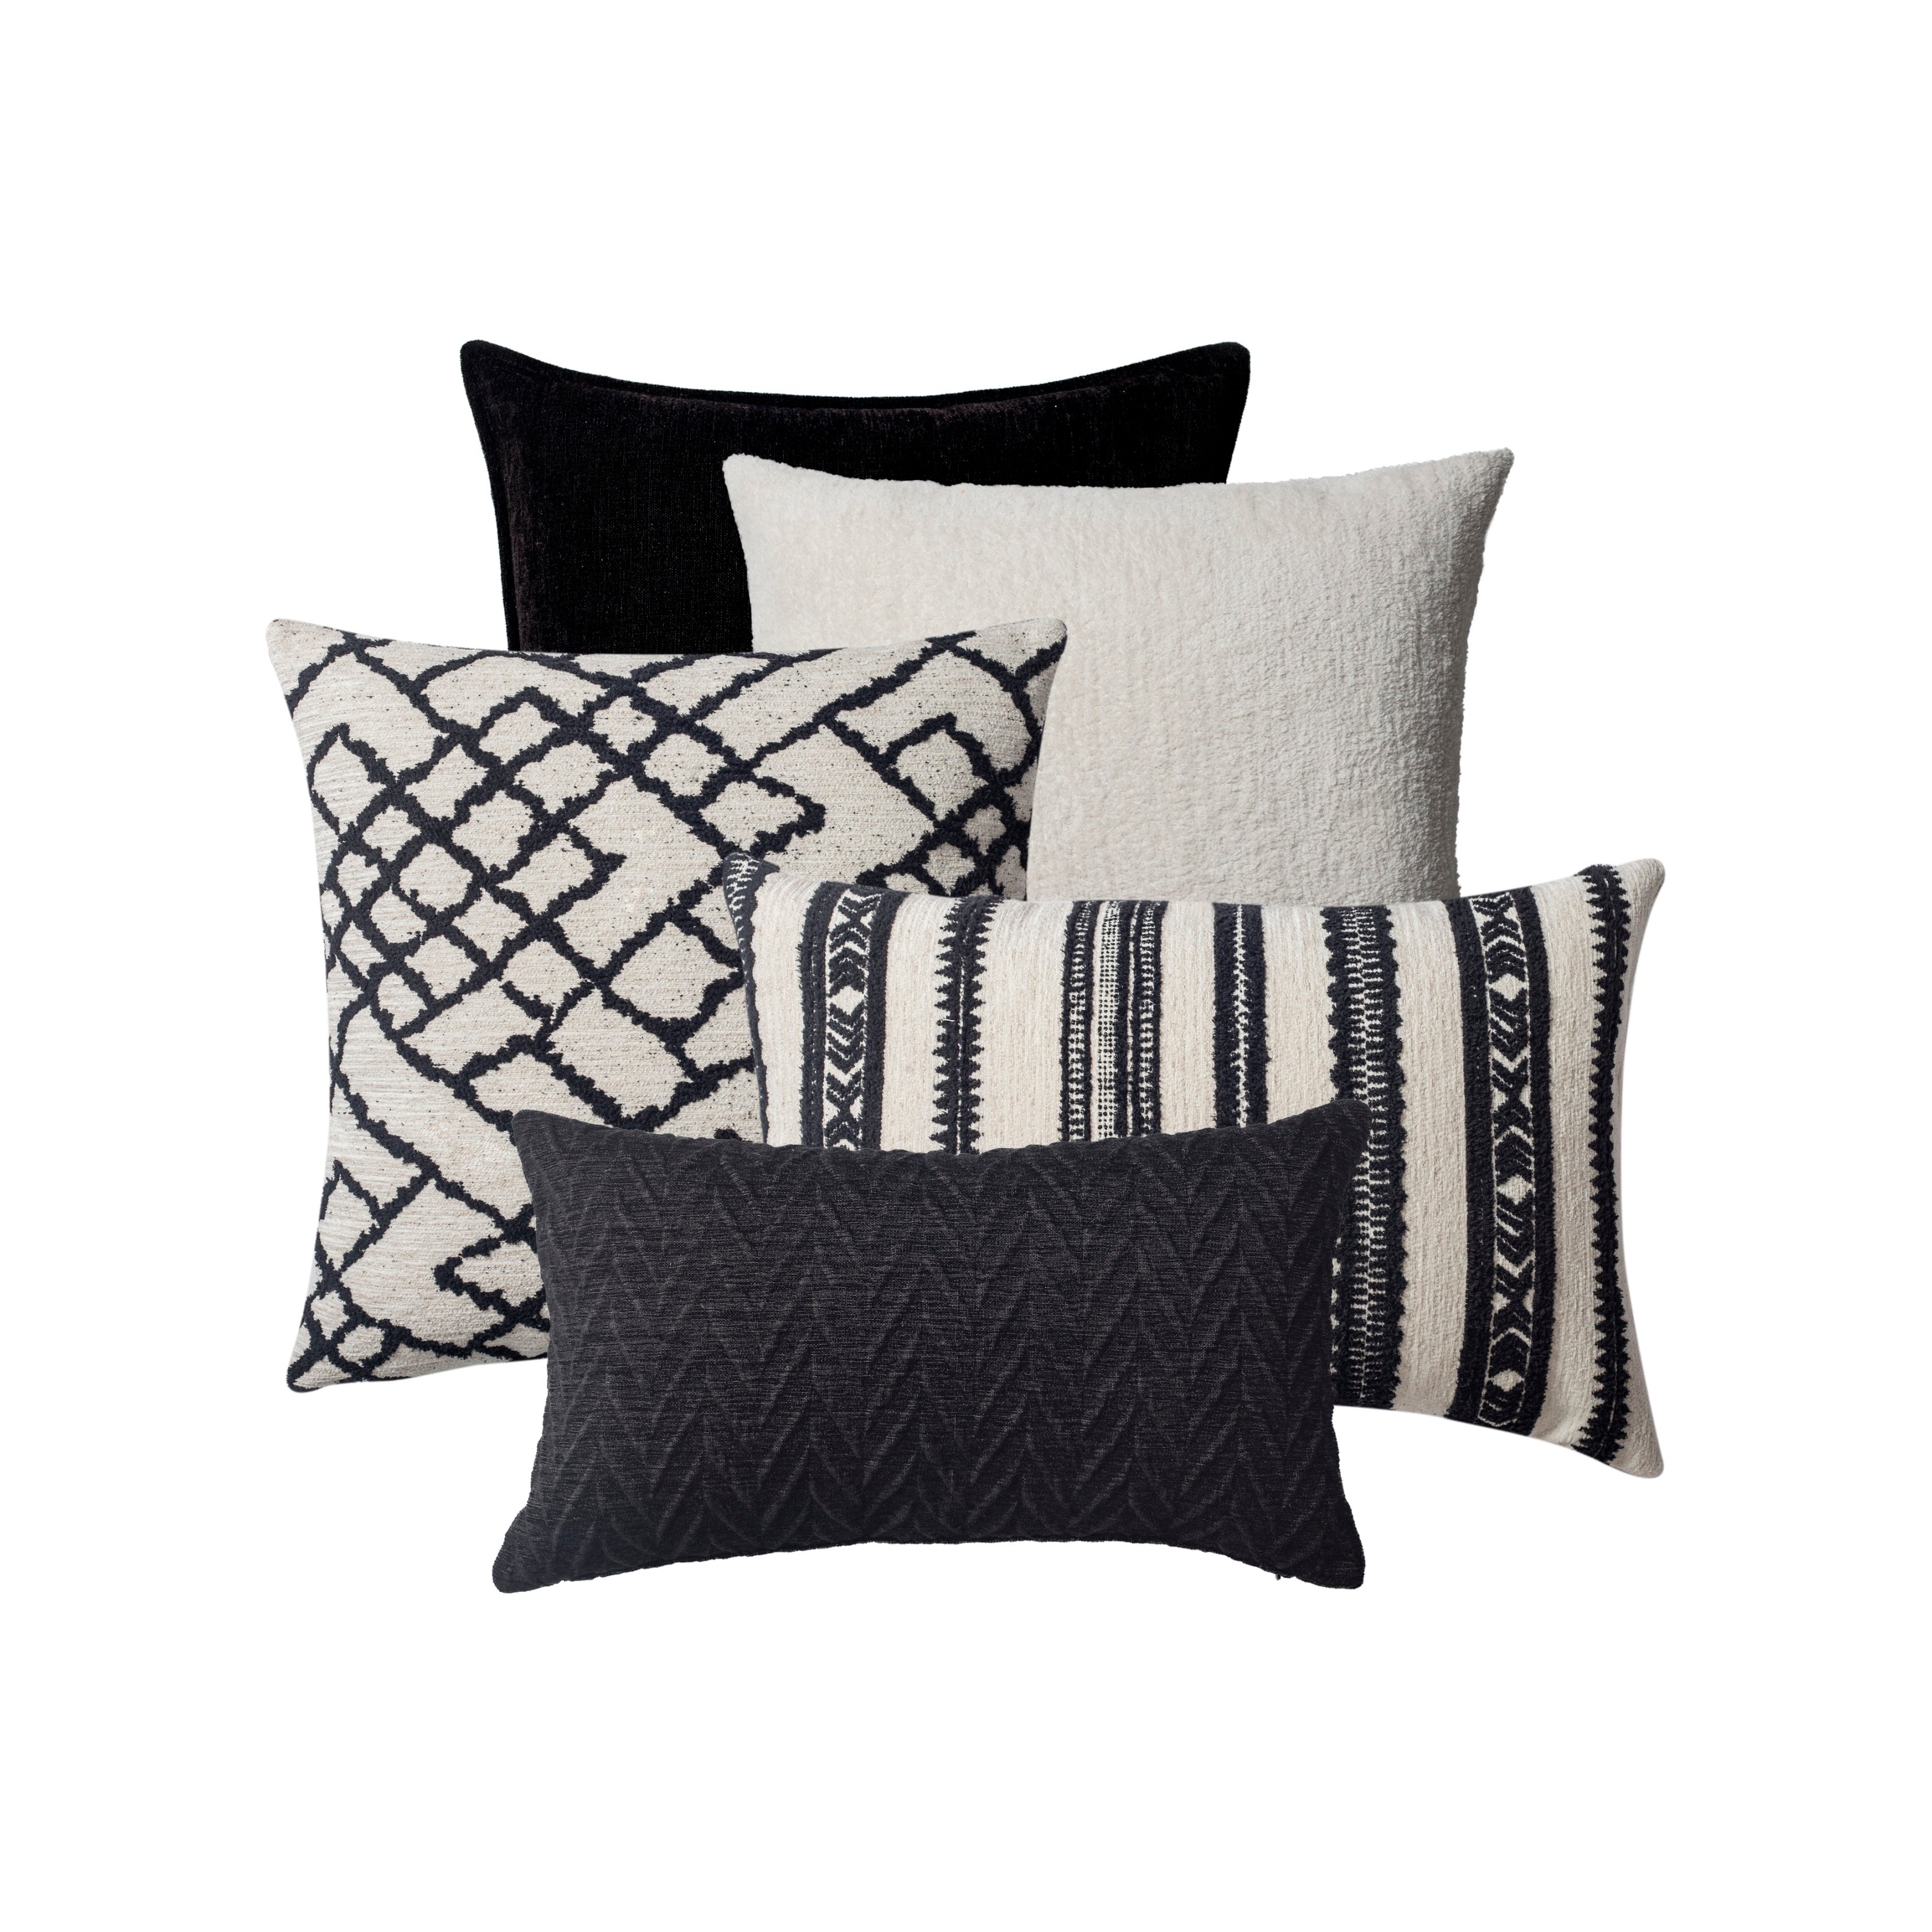 "Sisam" - Decorative Pillow - 5-Piece Combo Set (Cover Only)